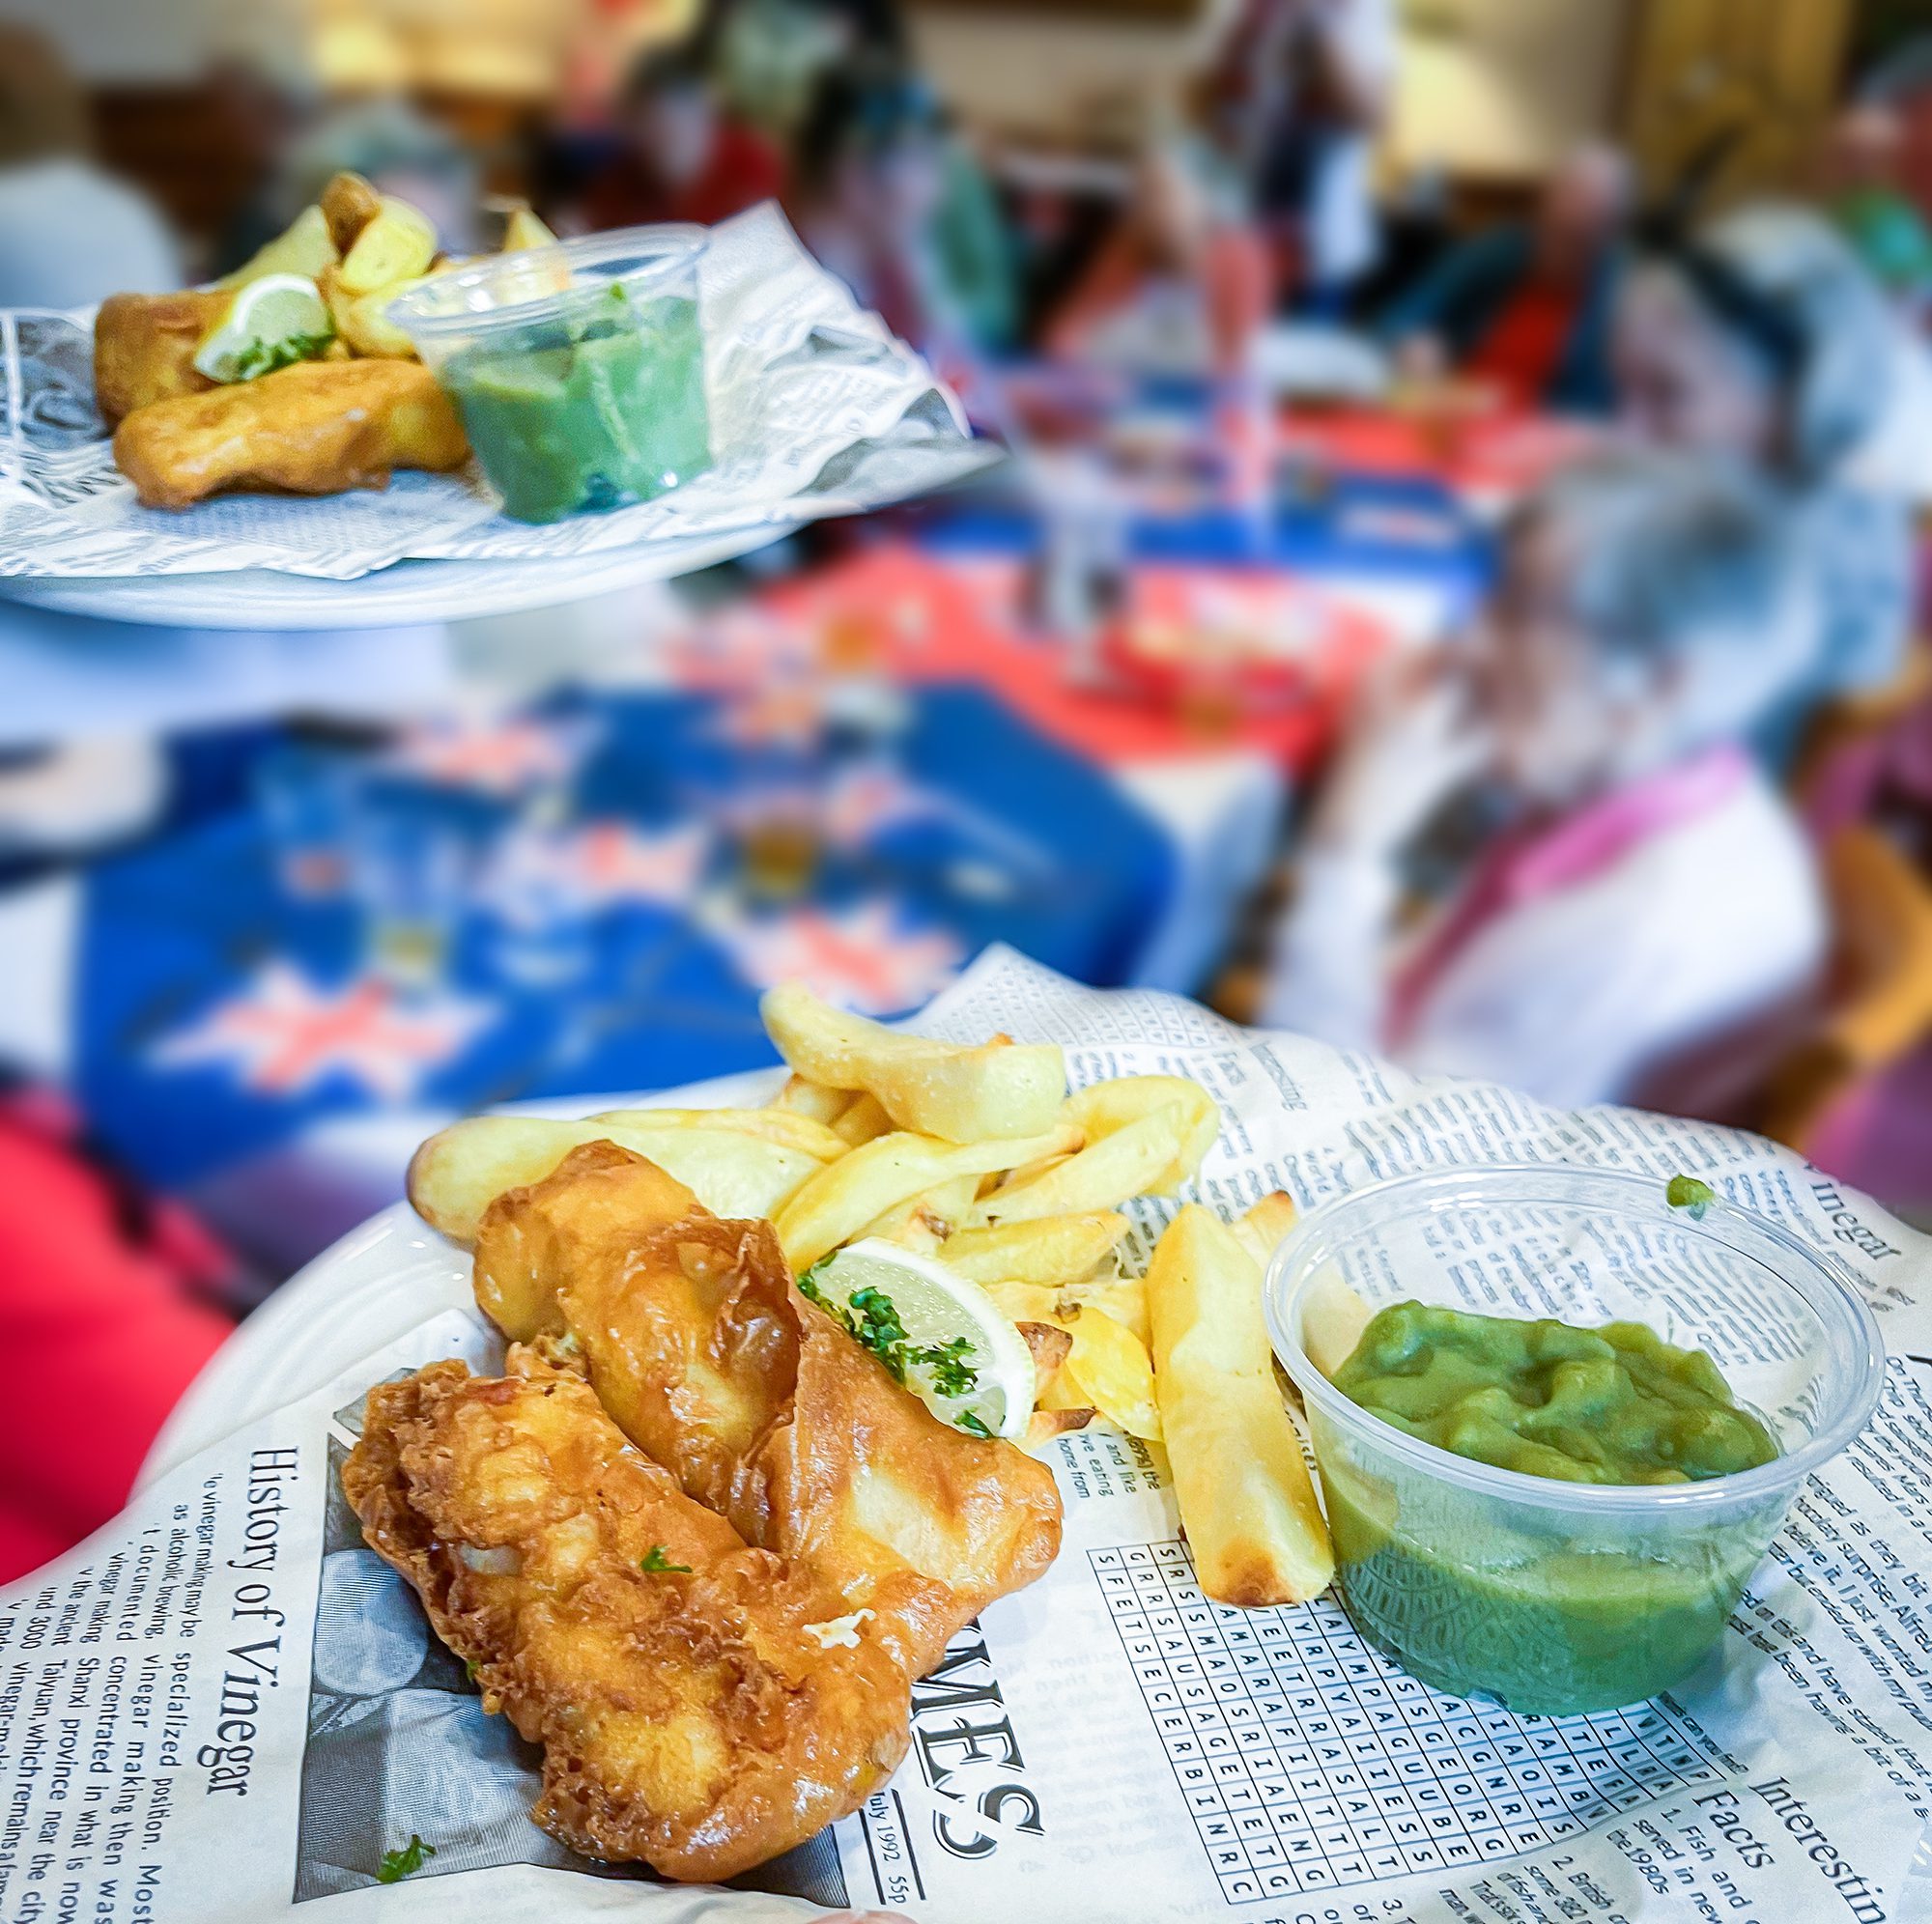 Fish and chips served on the day.